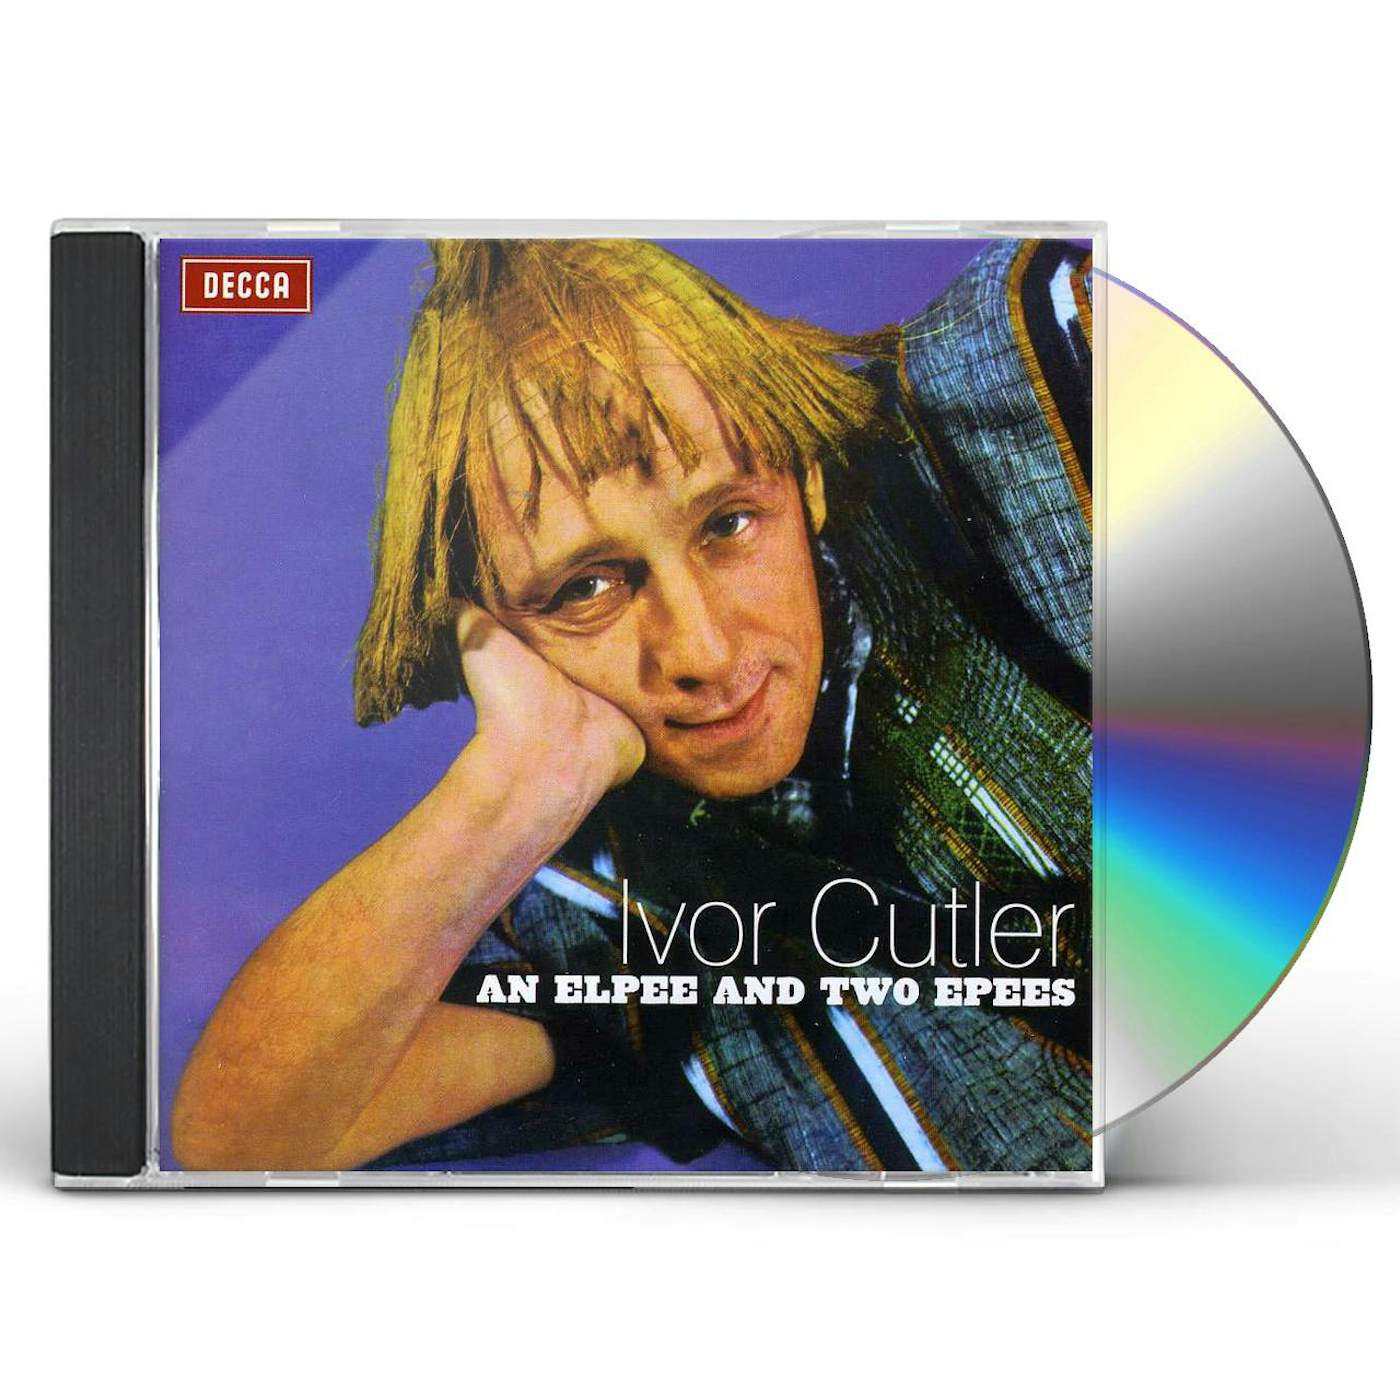 Ivor Cutler ELPEE & TWO EPEES CD